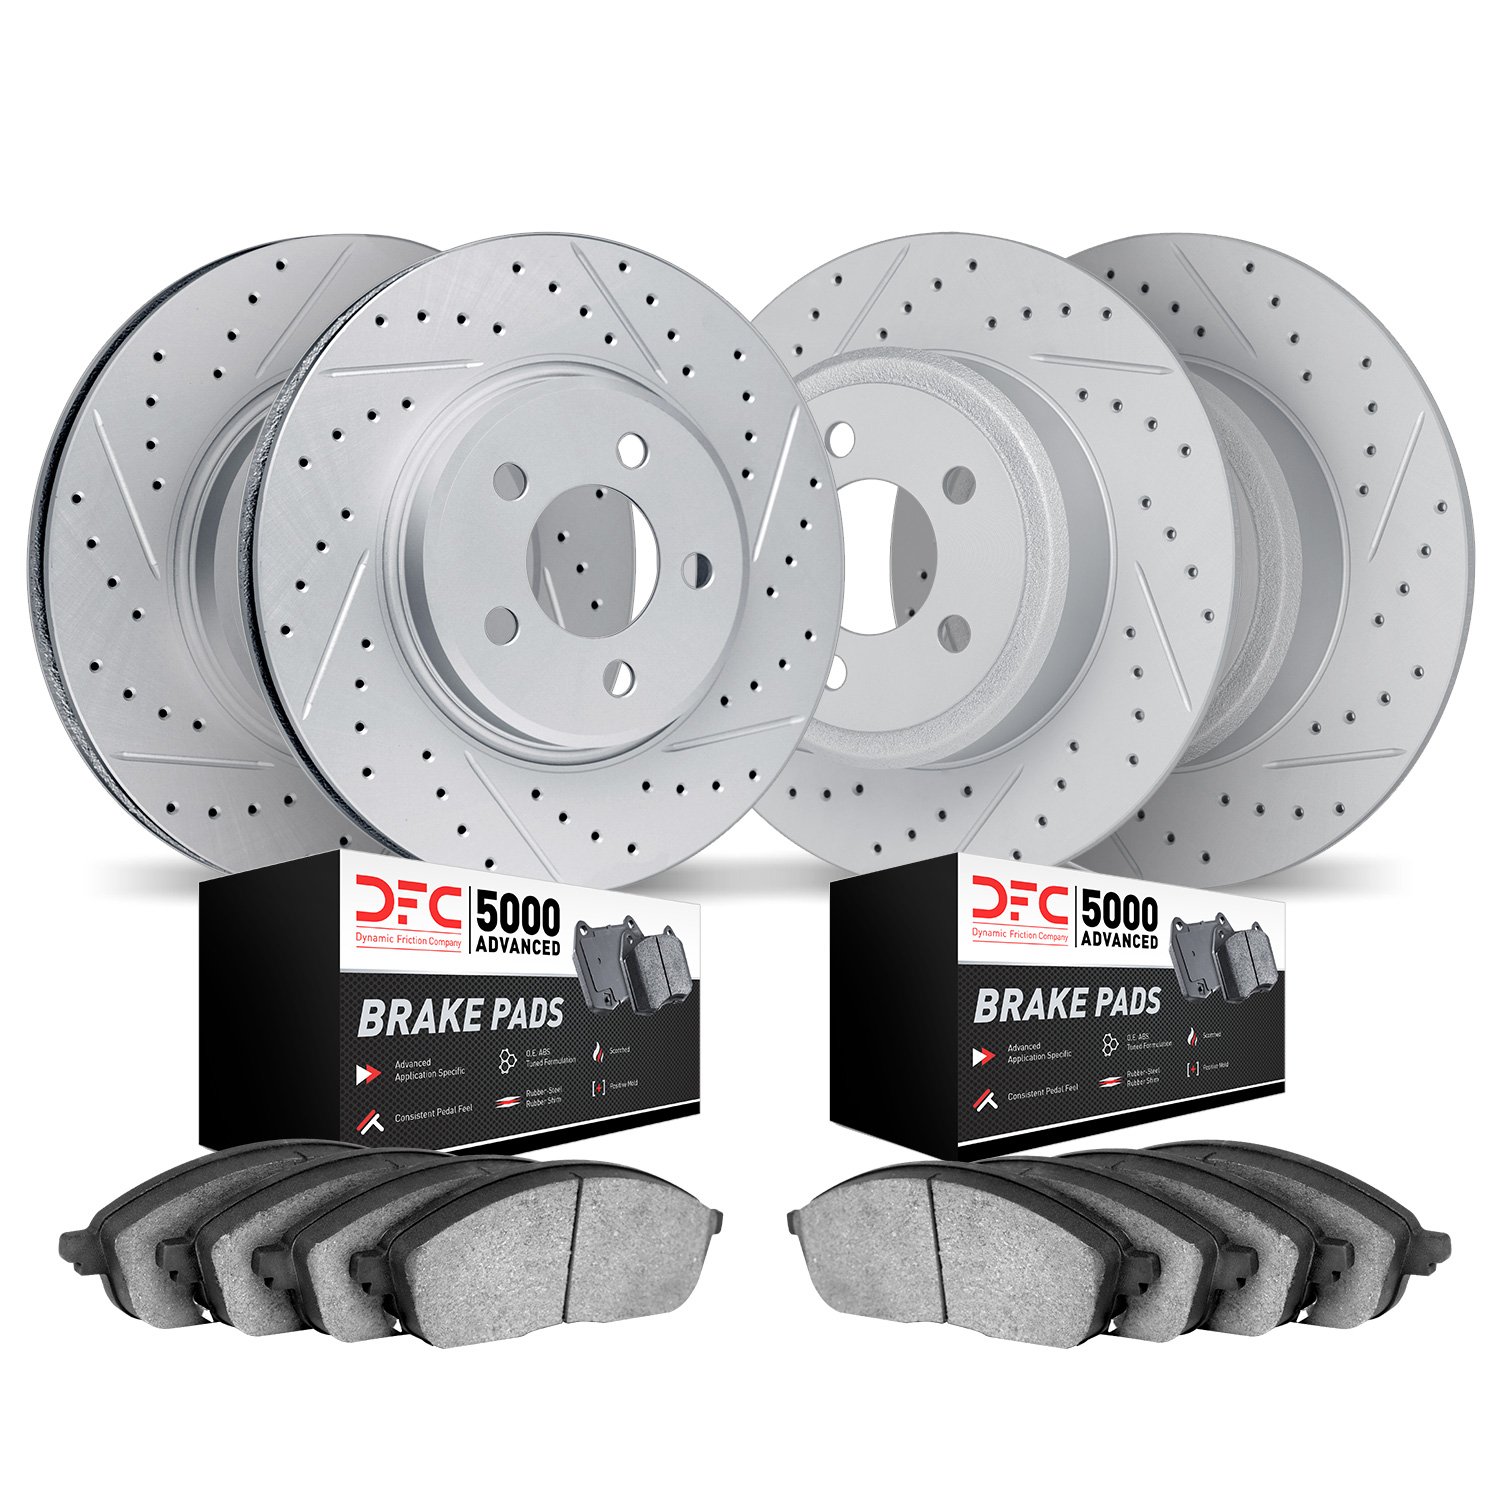 2504-11000 Geoperformance Drilled/Slotted Rotors w/5000 Advanced Brake Pads Kit, 1994-2002 Land Rover, Position: Front and Rear